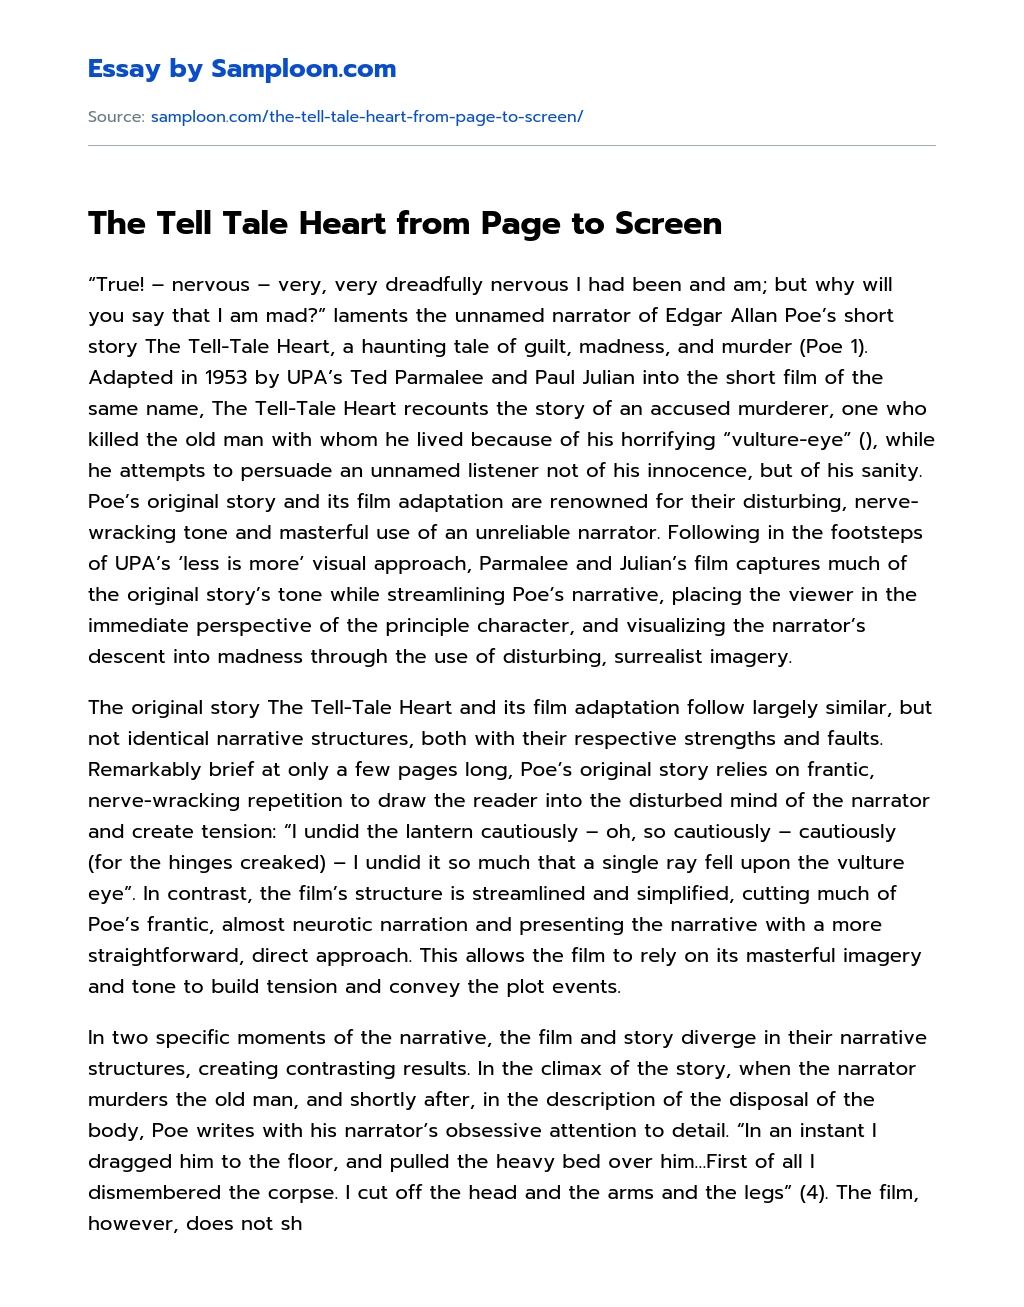 The Tell Tale Heart from Page to Screen essay